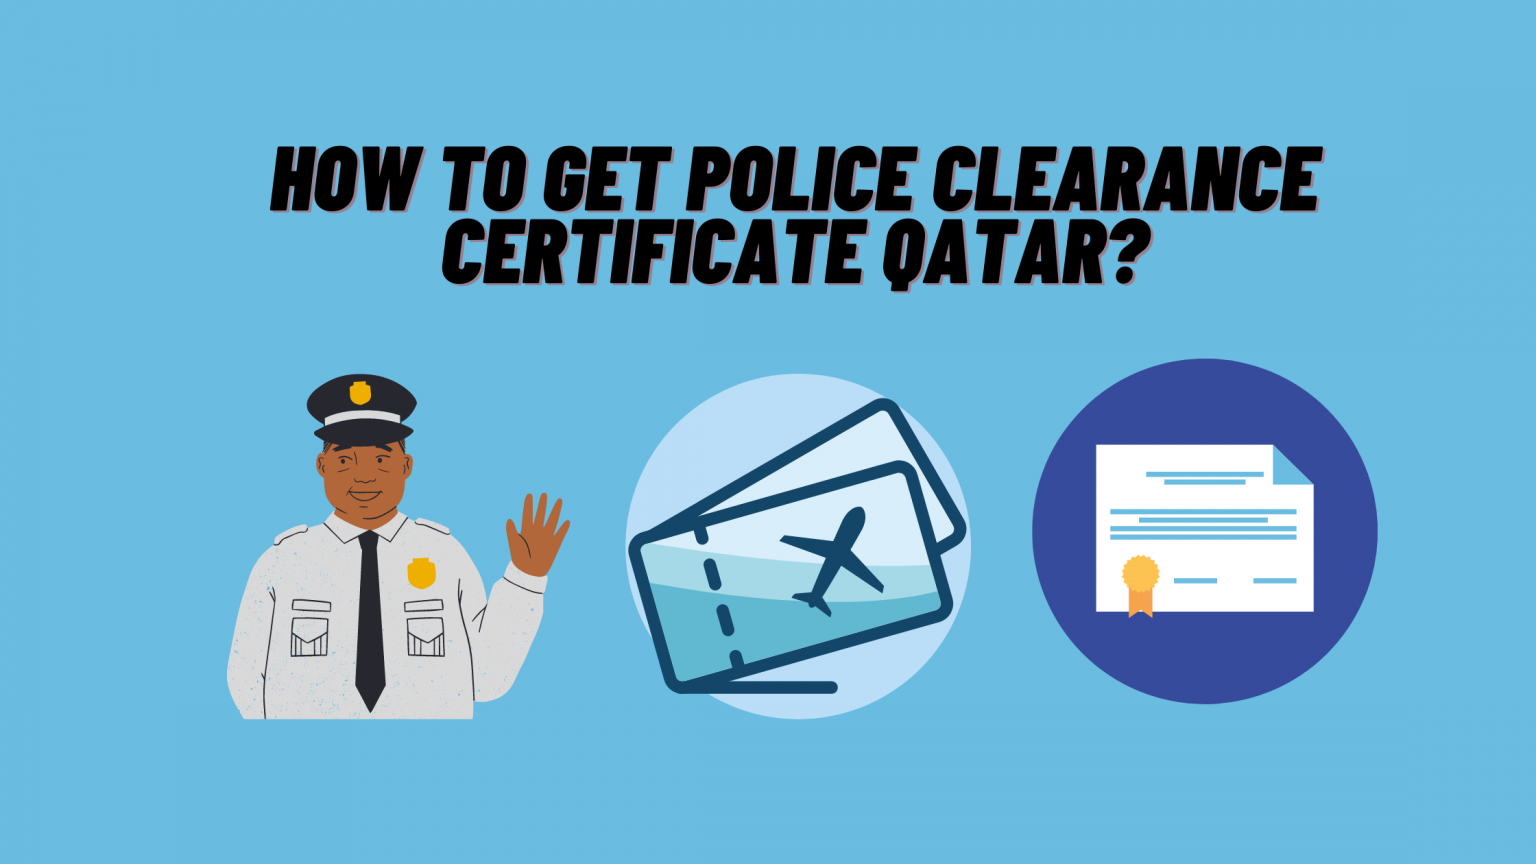 How to get Police Clearance Certificate in Qatar